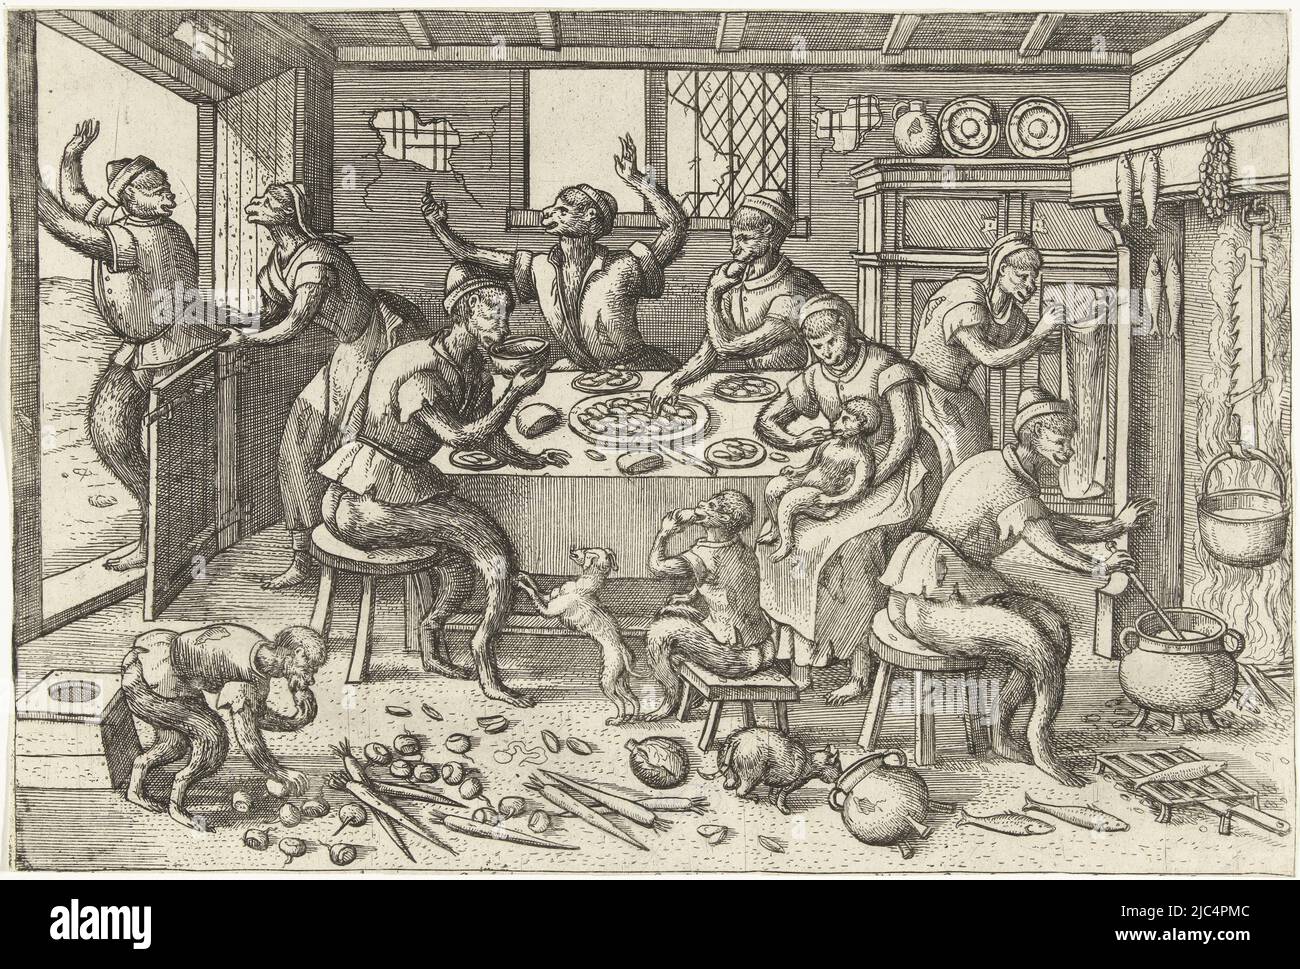 A 16th century kitchen scene. In a dilapidated house, several skinny monkeys sit around a table. They are grabbing from a bowl of mussels. One is drinking a bowl of soup. Scattered on the floor are carrots, turnips and cabbage, vegetables for the poor. Over the fireplace, fish are being smoked, also poor people's food. A fat monkey has visited, but is now trying to get away again. The poor monkeys want to stop him, Skinny kitchen Monkey game (series title), print maker: Pieter van der Borcht (I), Pieter Bruegel (I), Pieter van der Heyden, Antwerp, (possibly), 1563 - 1608, paper, etching, w 276 Stock Photo